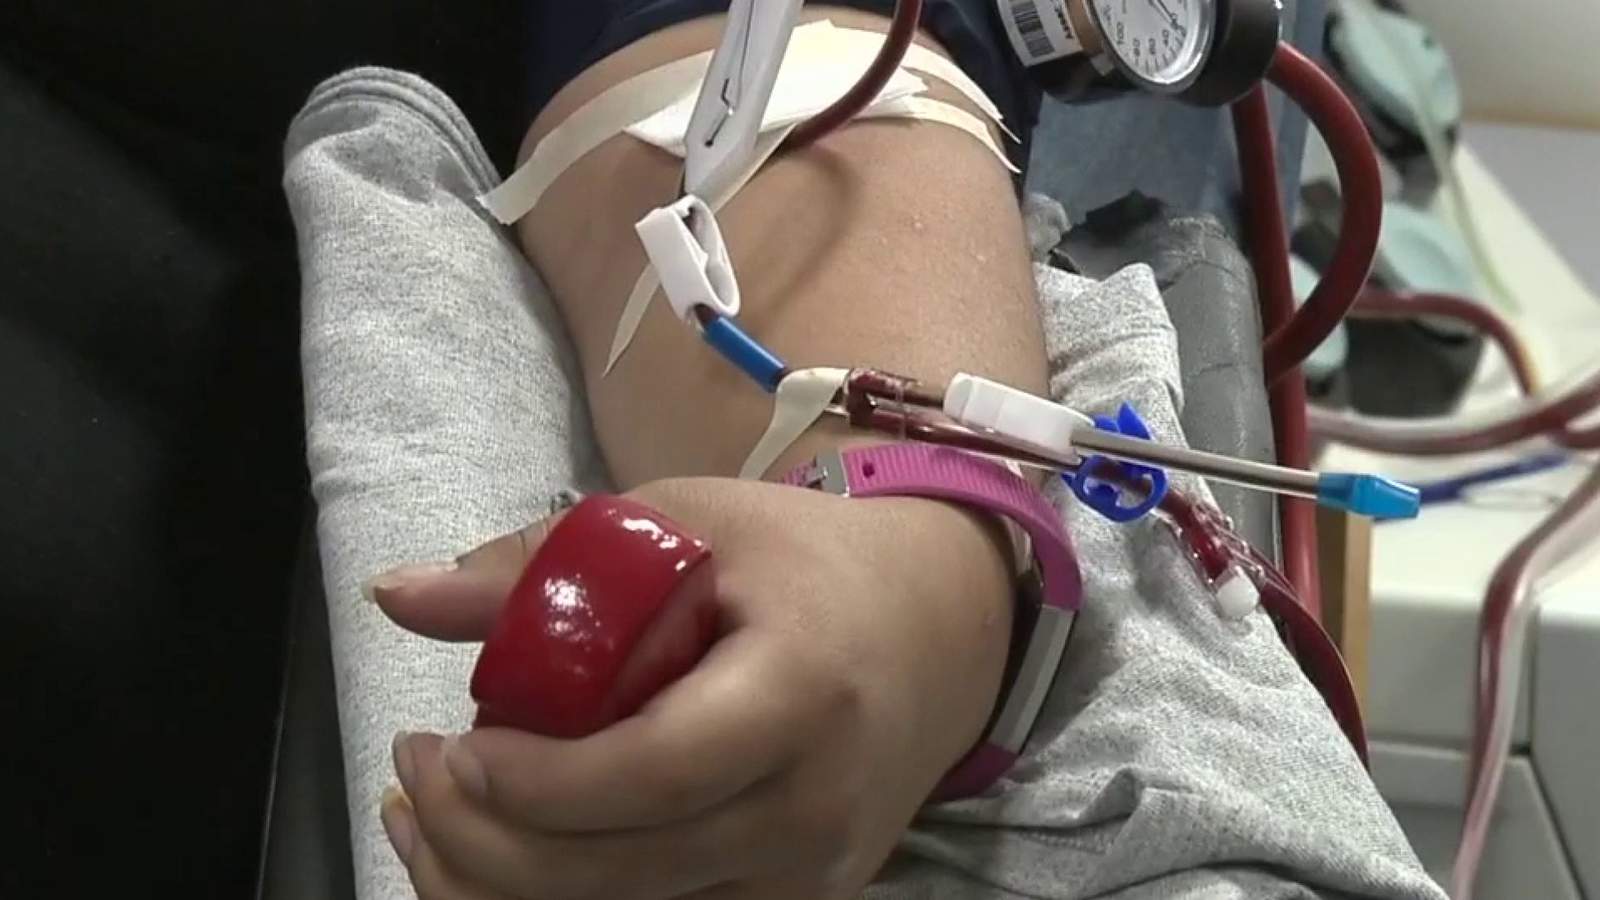 Blood donors sought as San Antonio Metro Health declares blood emergency in city